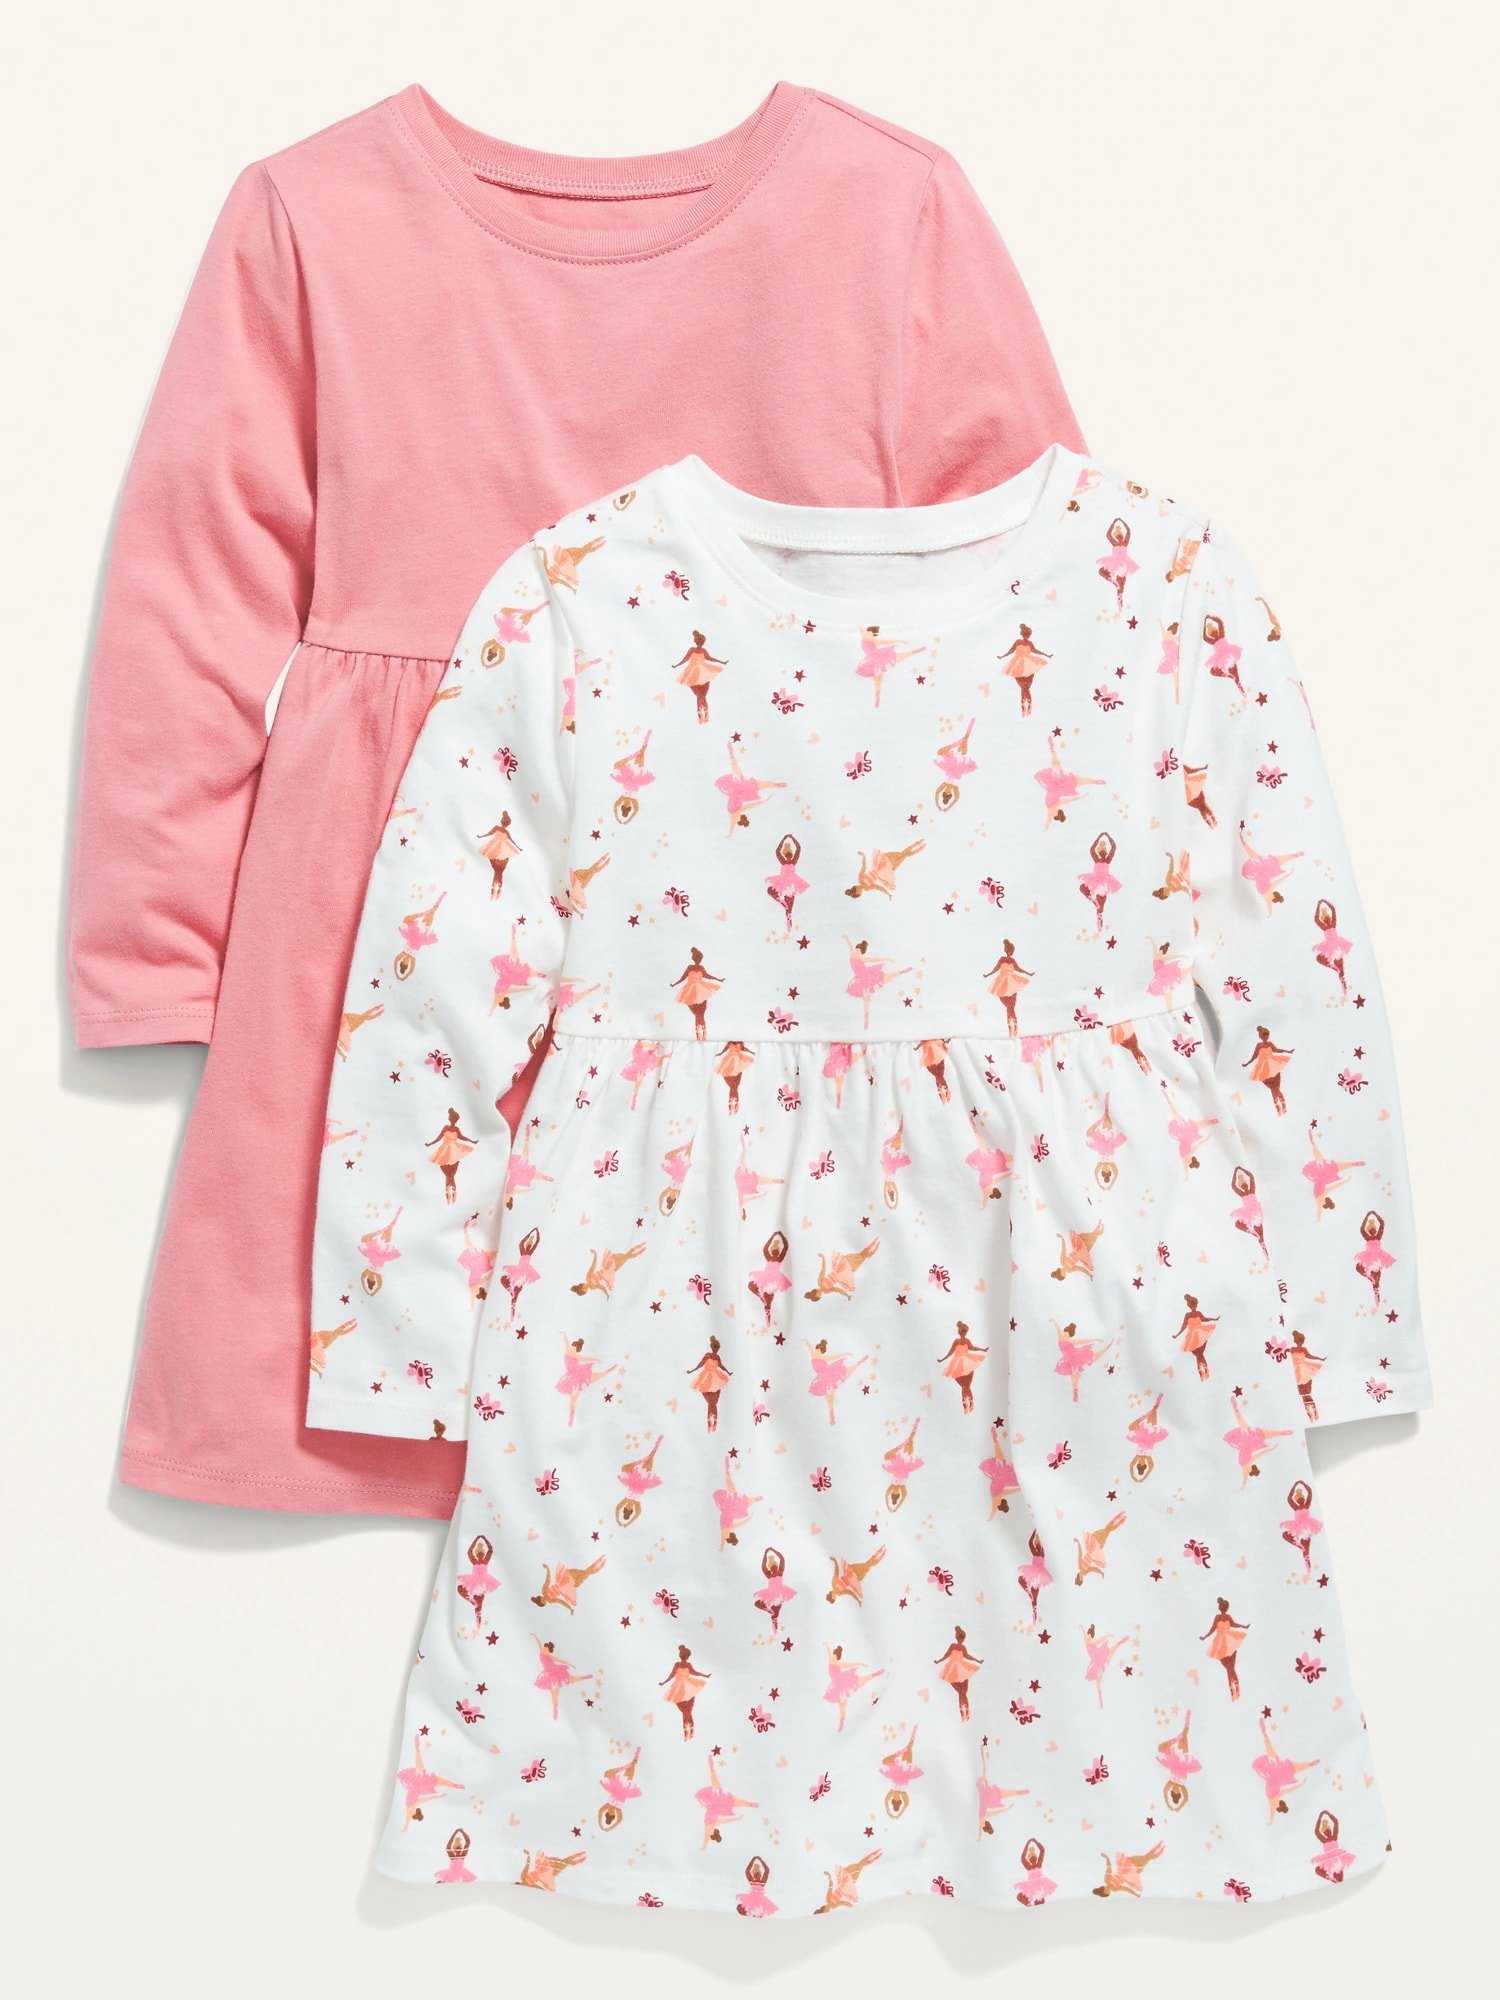 Best Brands for Girls Clothes